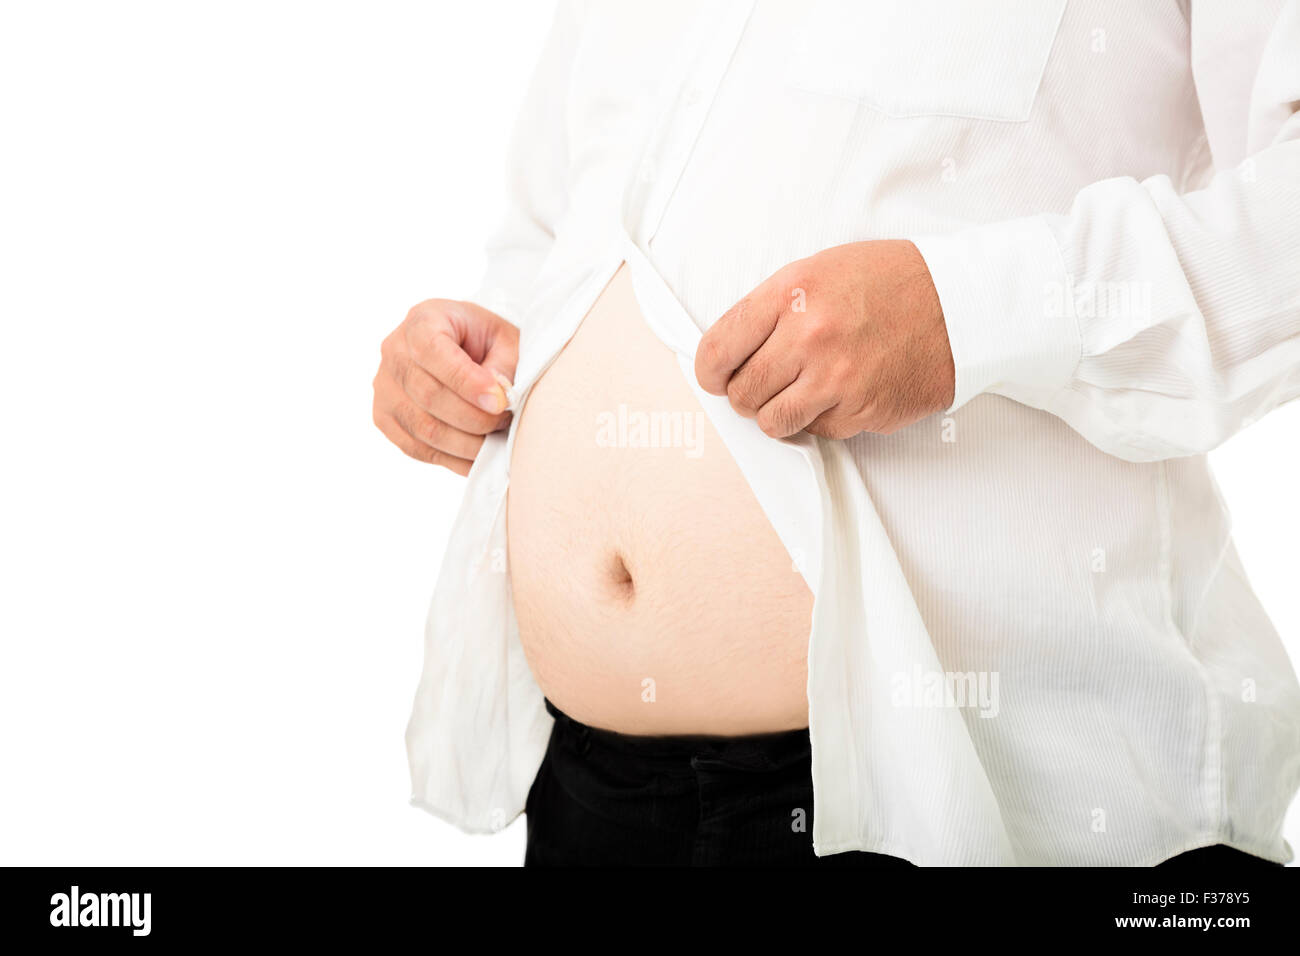 Fat business man with a big belly Stock Photo